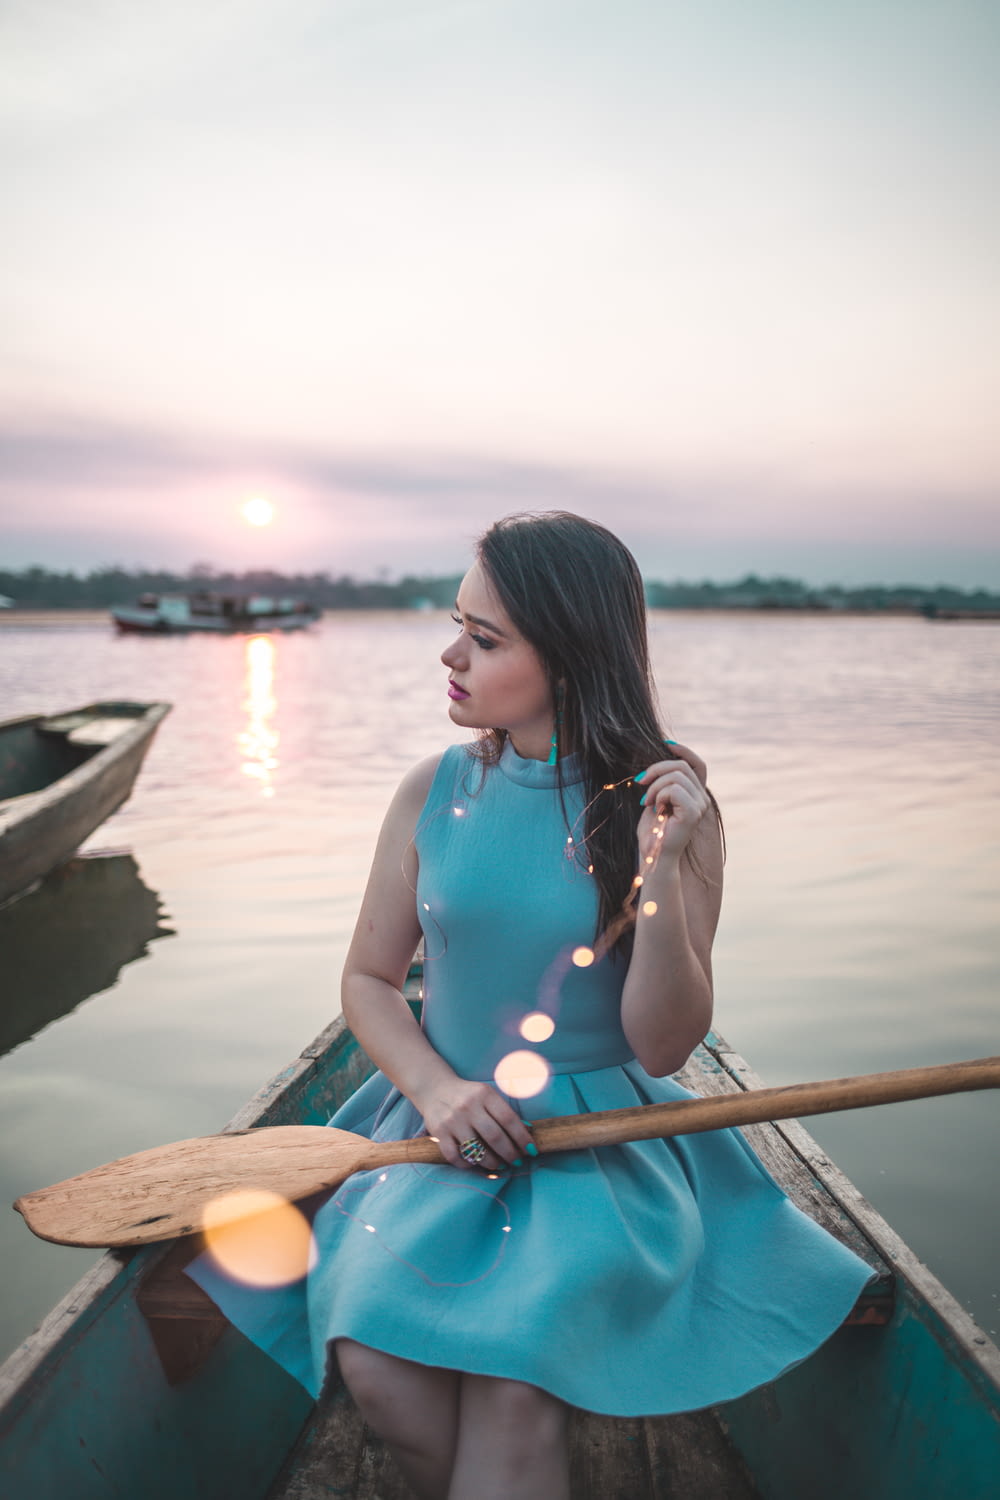 woman sitting on boat holding paddle